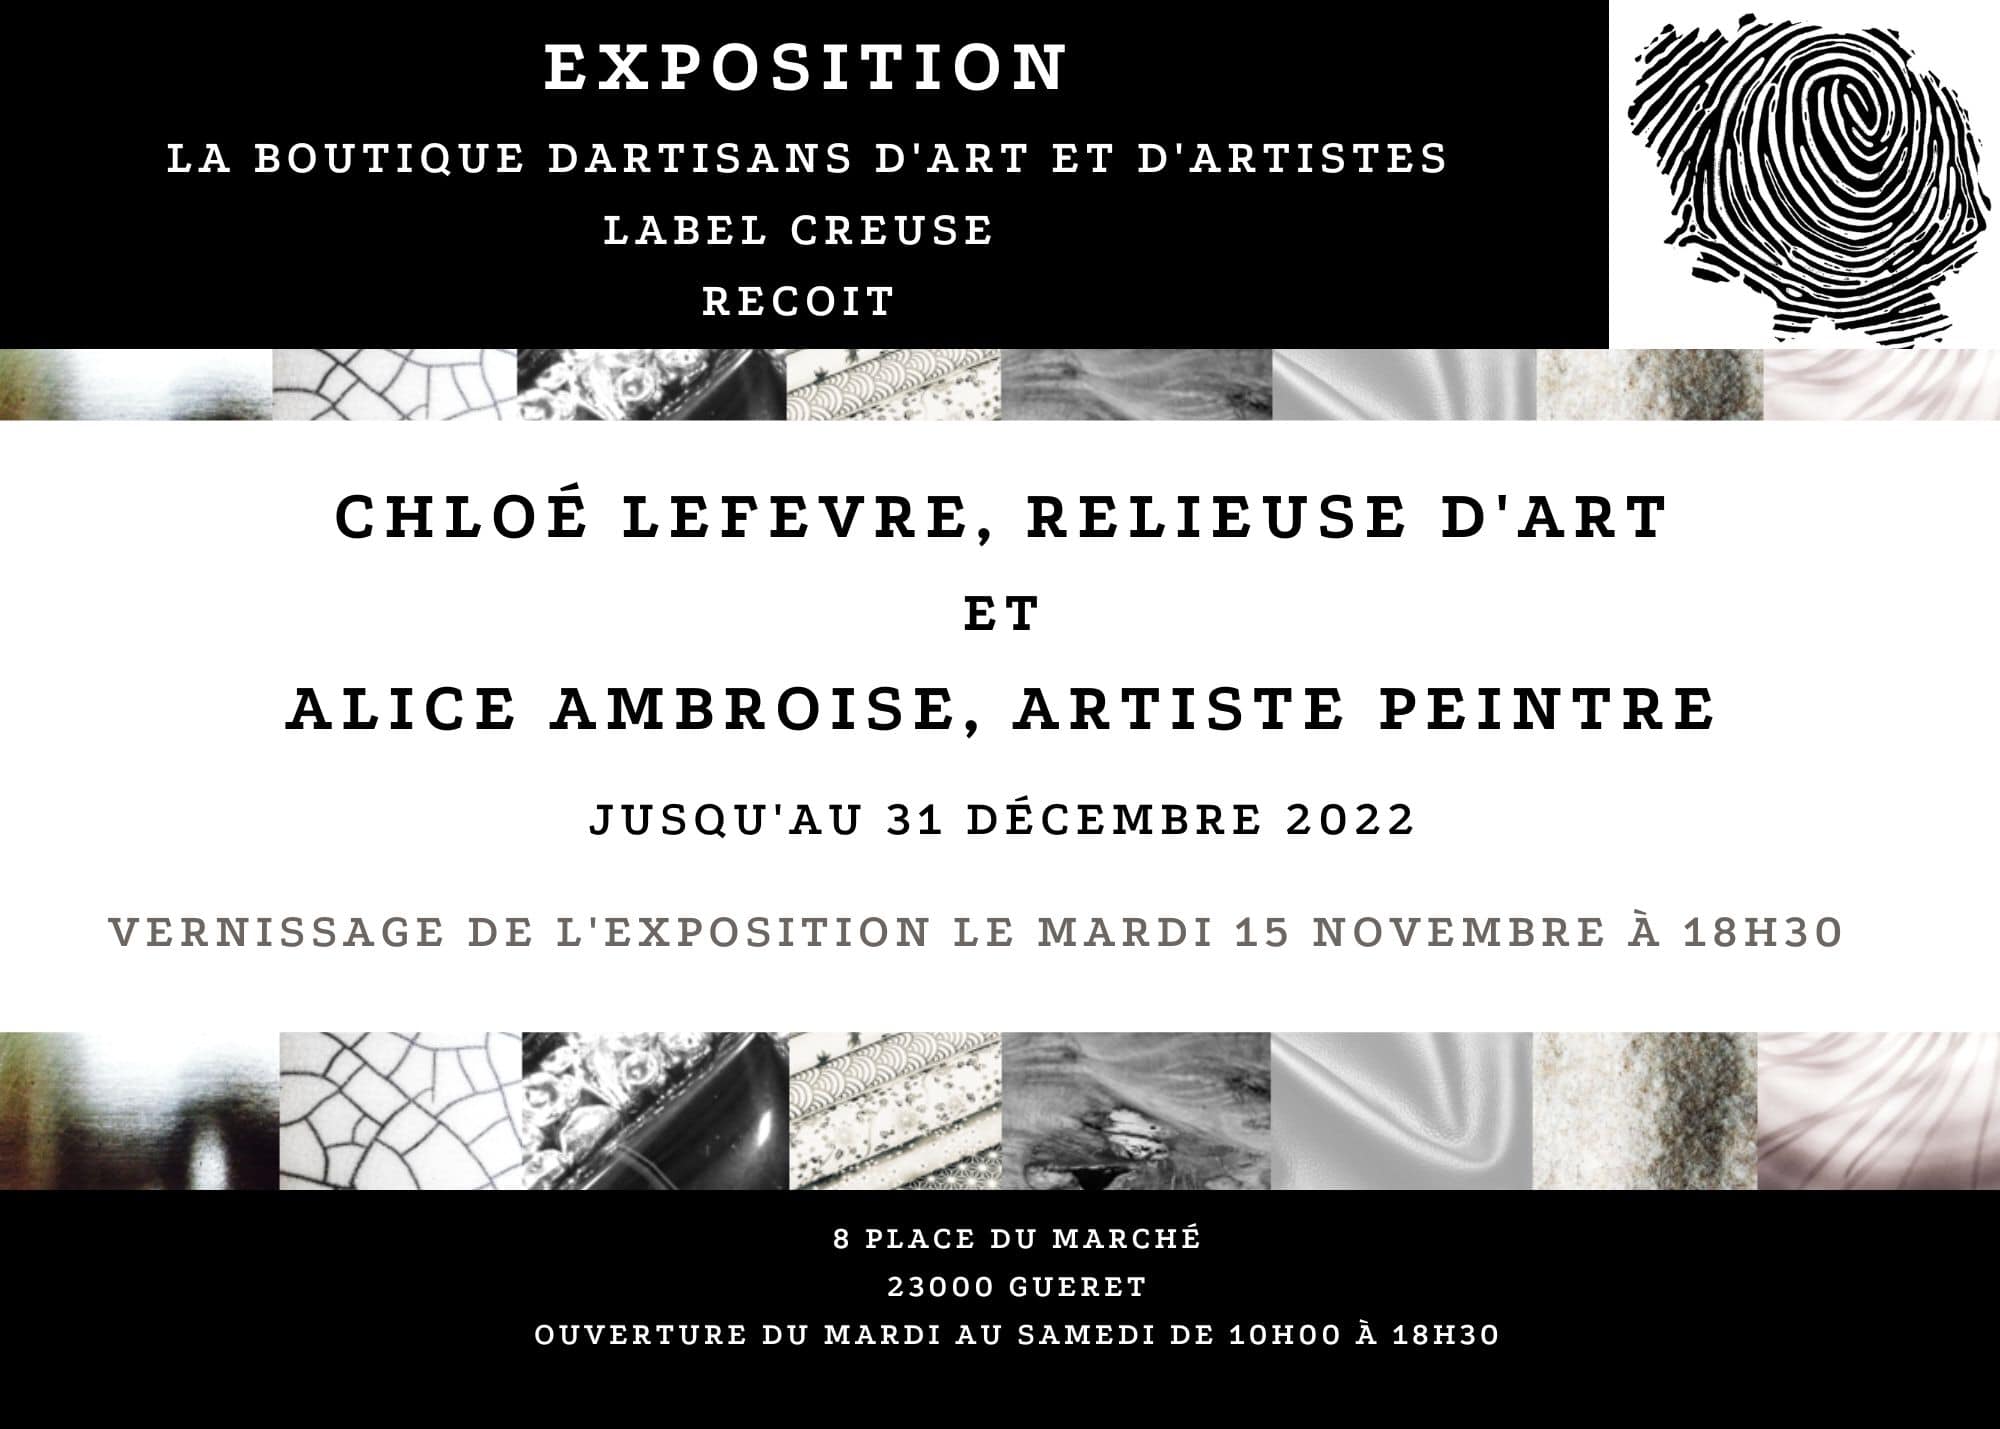 Exposition Label Creuse